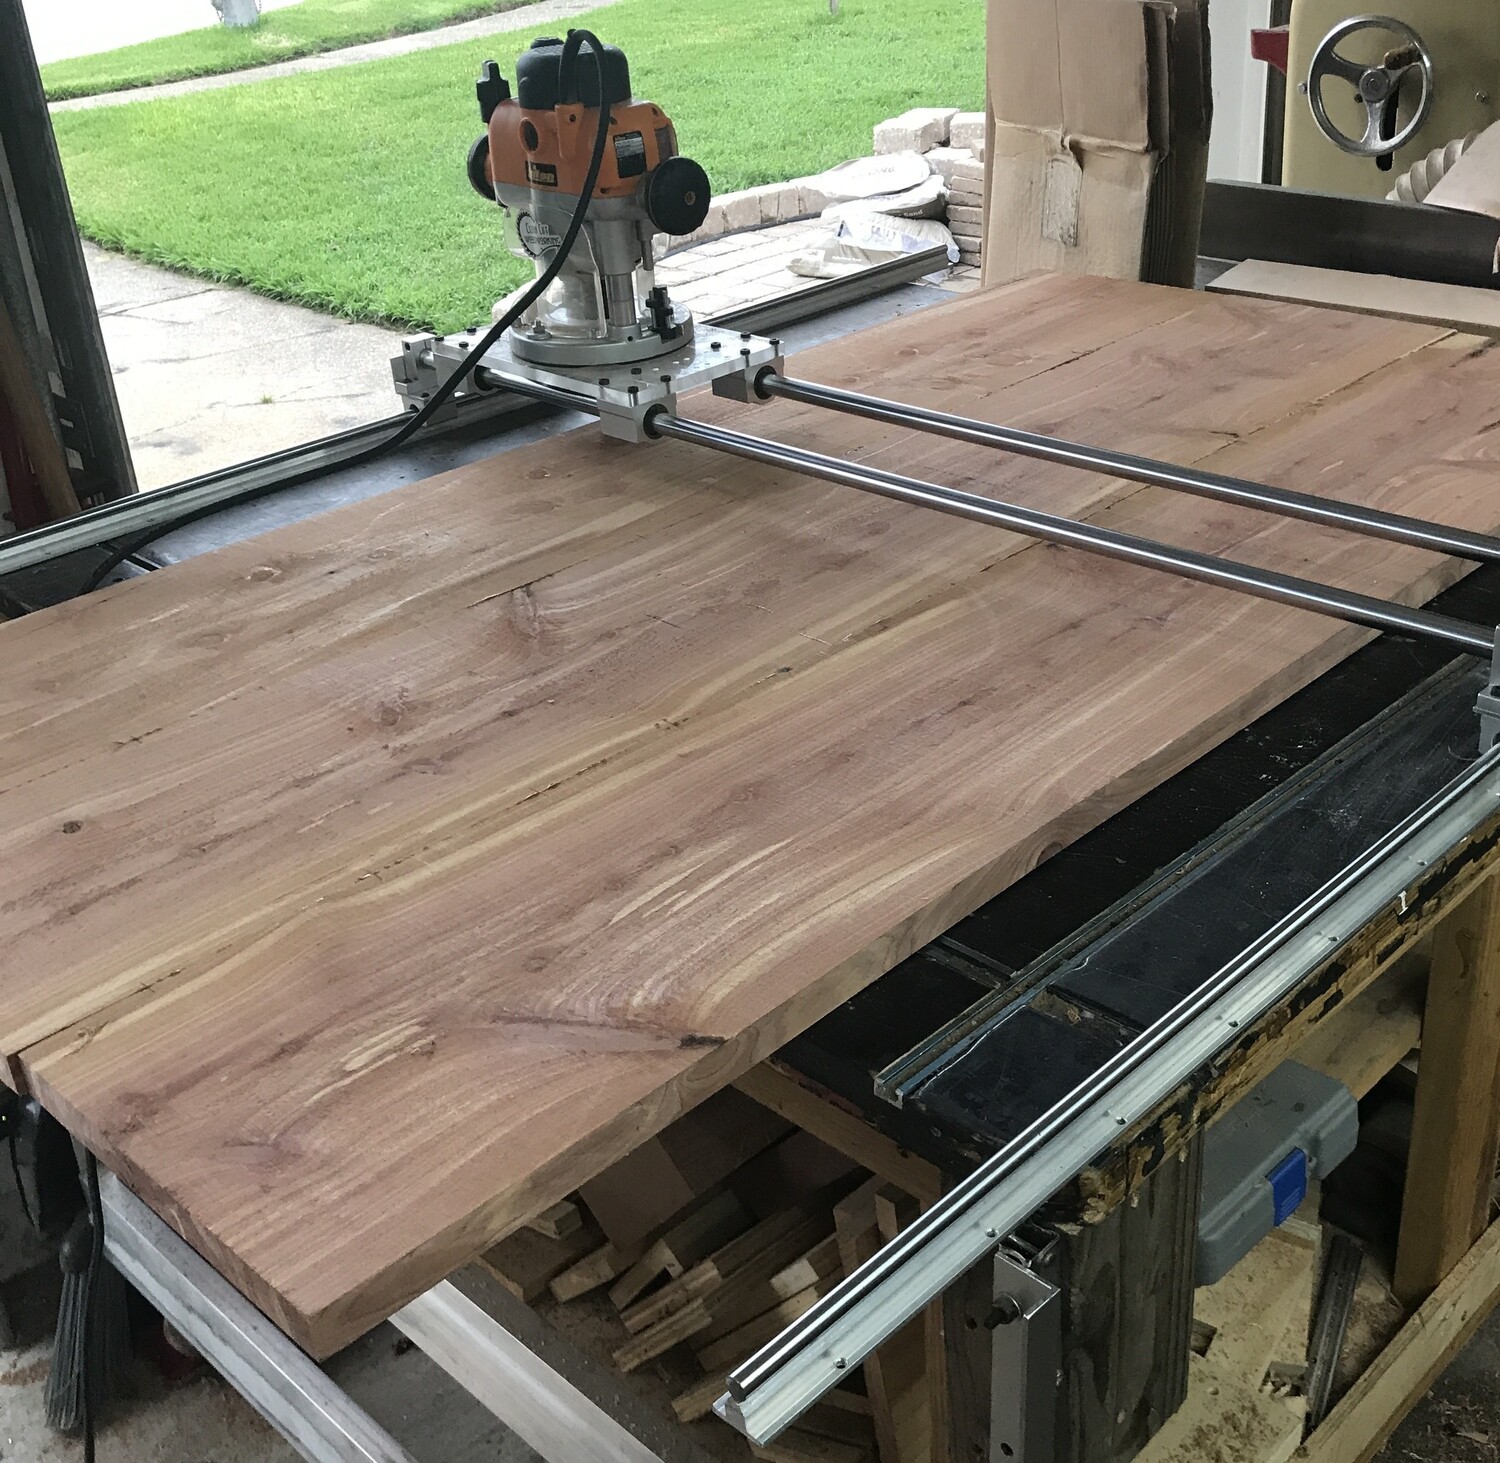 40"x47" Woodworking Router Sled